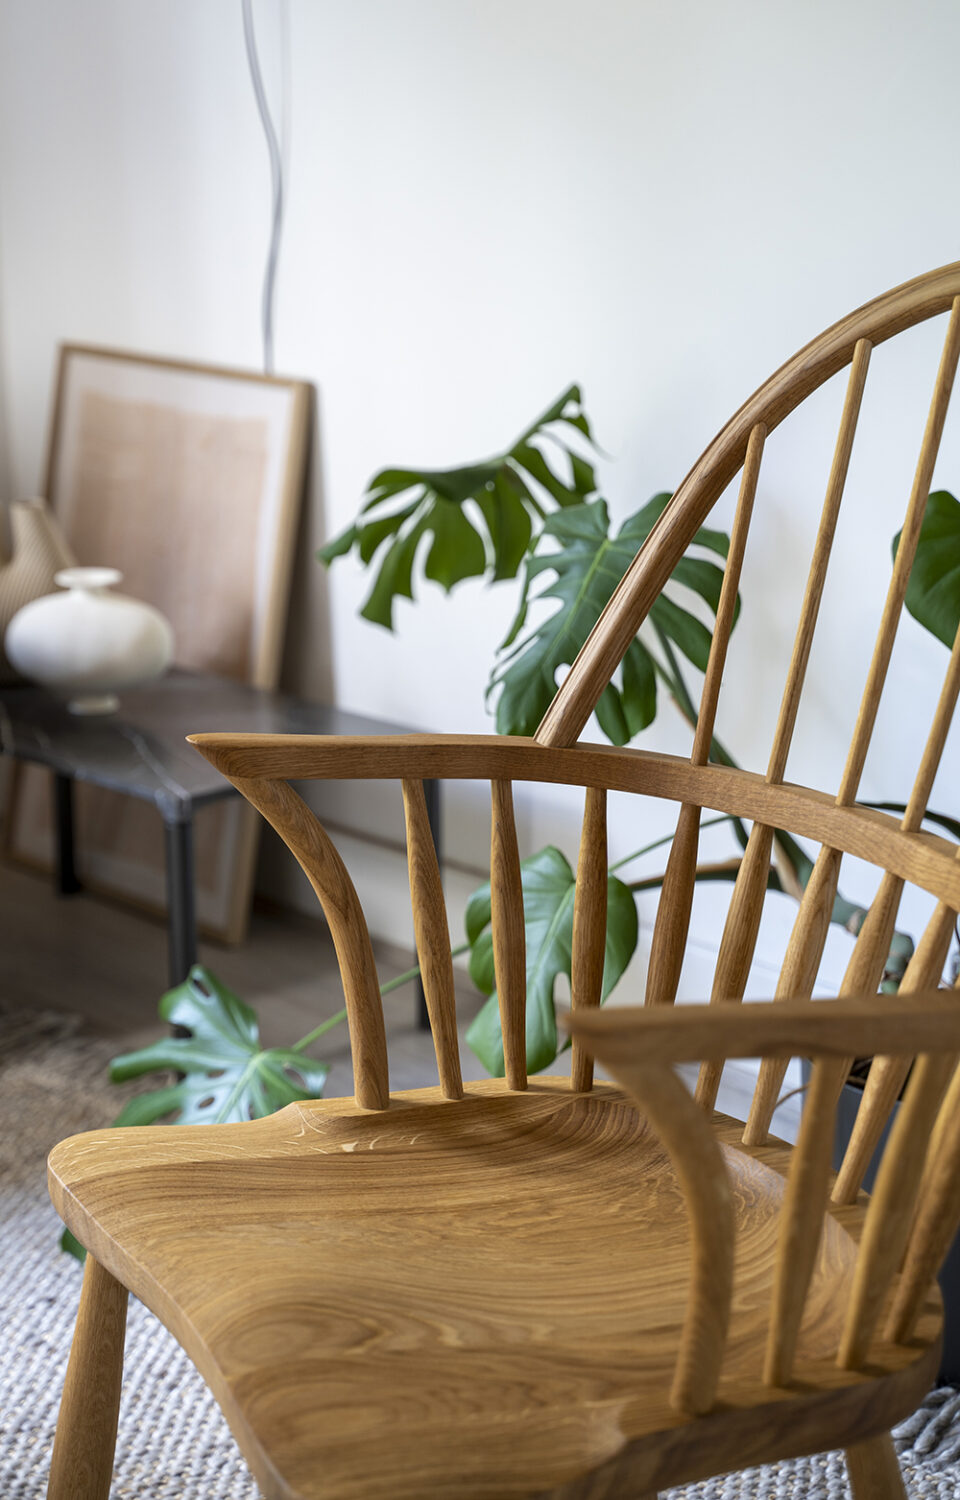 close up of the seat on the Windsor chair, a carefully sculpted wooden chair made for comfort from Carl Hansen